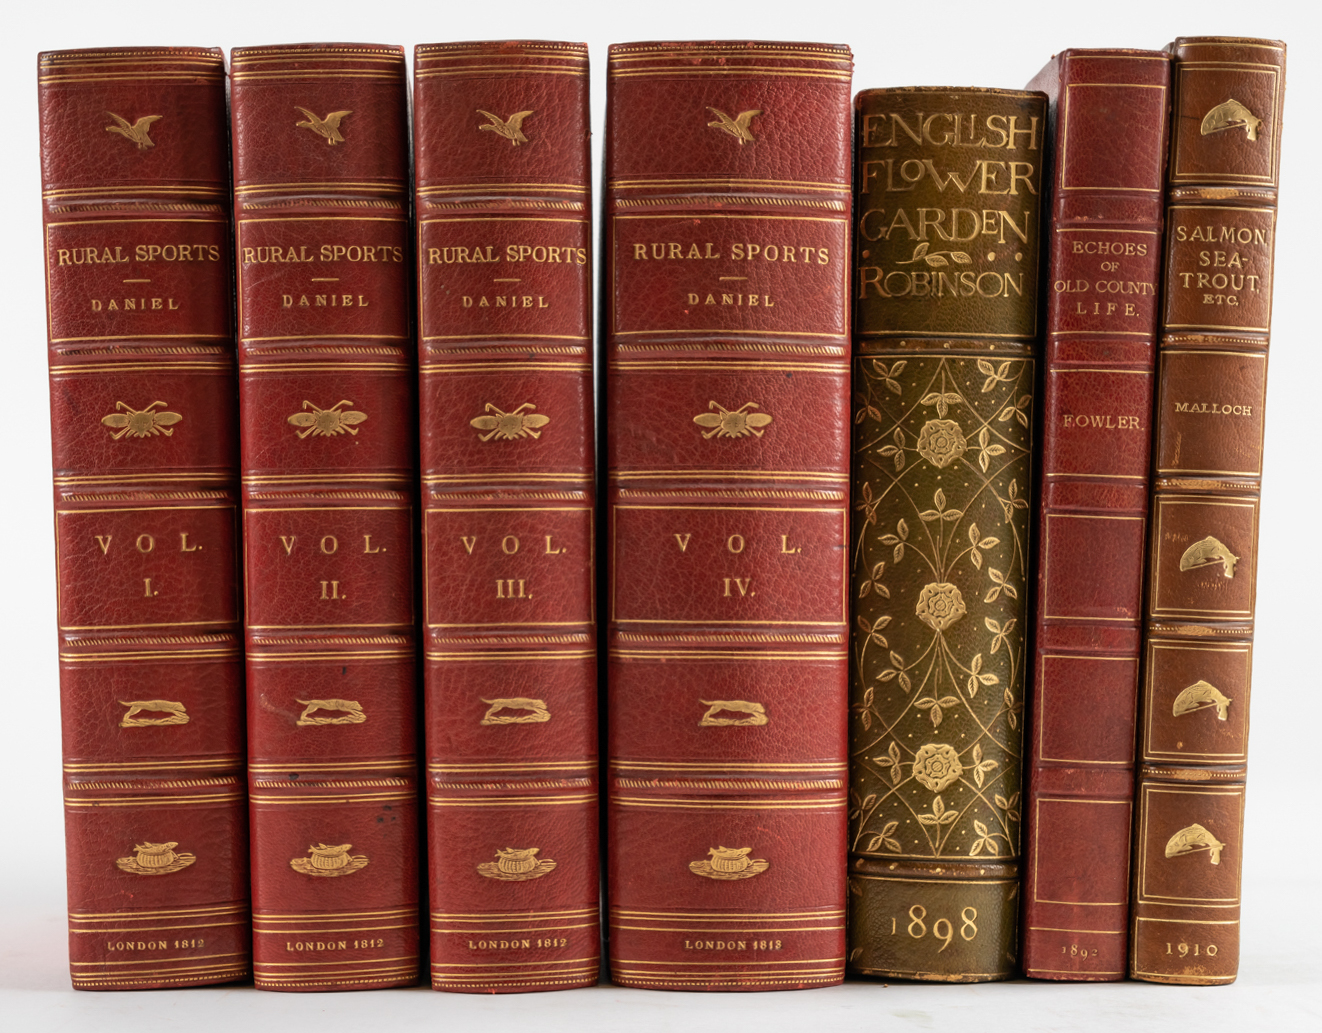 DANIEL, William Barker (1754-1833). Rural Sports, London, 1812-13, 4 volumes, large 8vo, plates, attractively bound in later red half morocco gilt. With 3 other books of related interest, attractively-bound. (7)